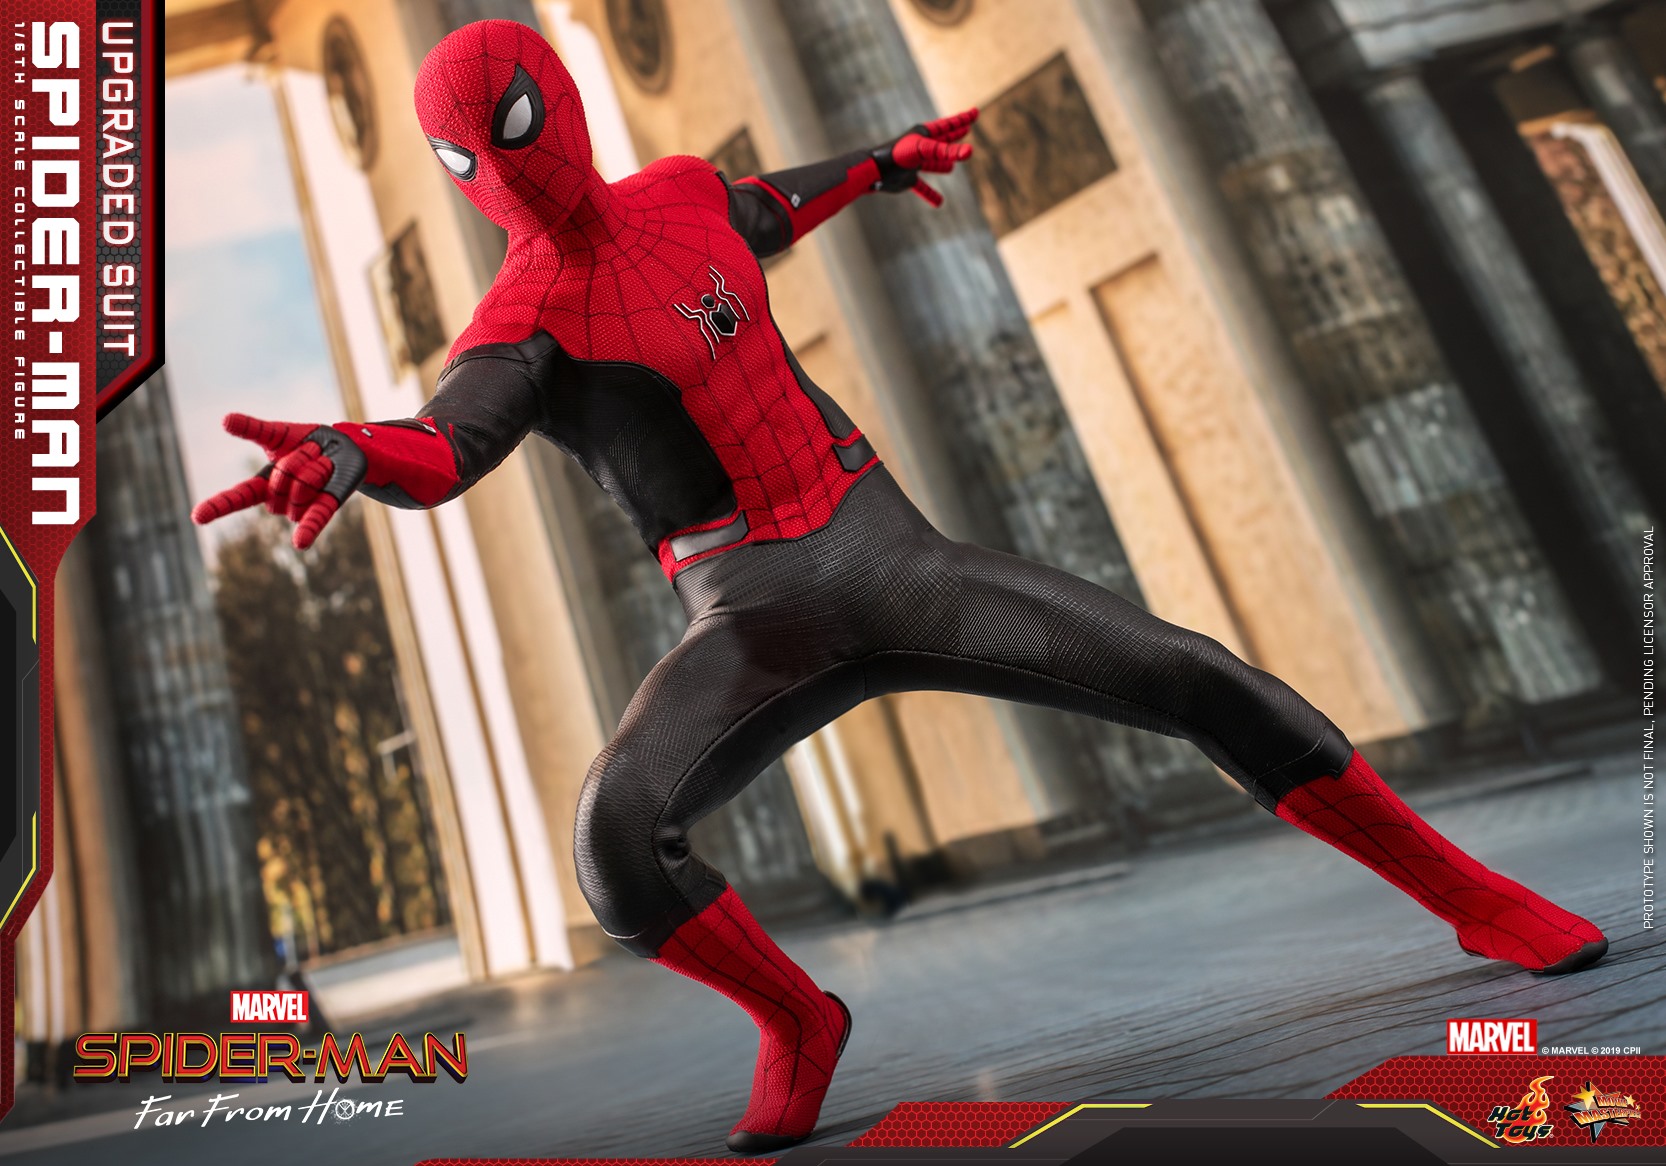 Hot Toys Upgraded Suit Spider-Man Far From Home Figure Up for 